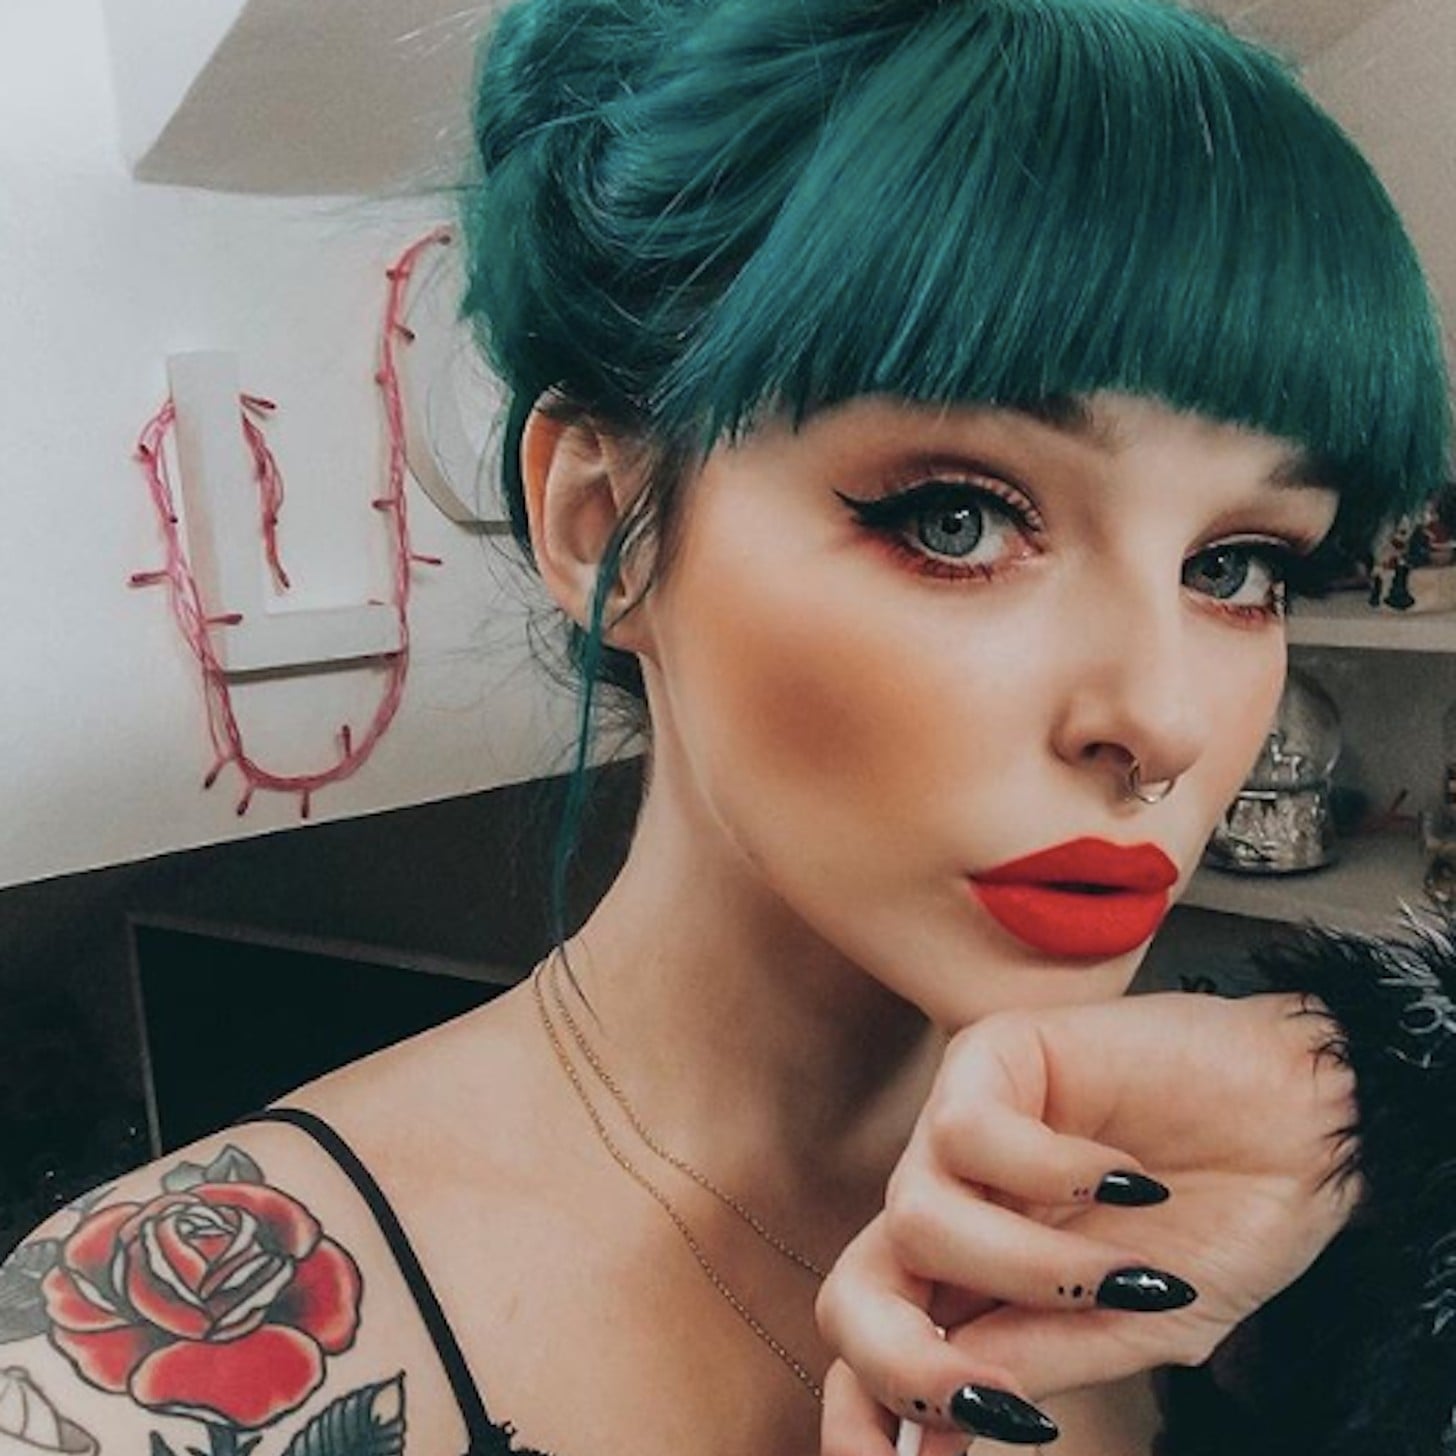 10 Teal Hair Color Ideas  How To Wear This Striking Look